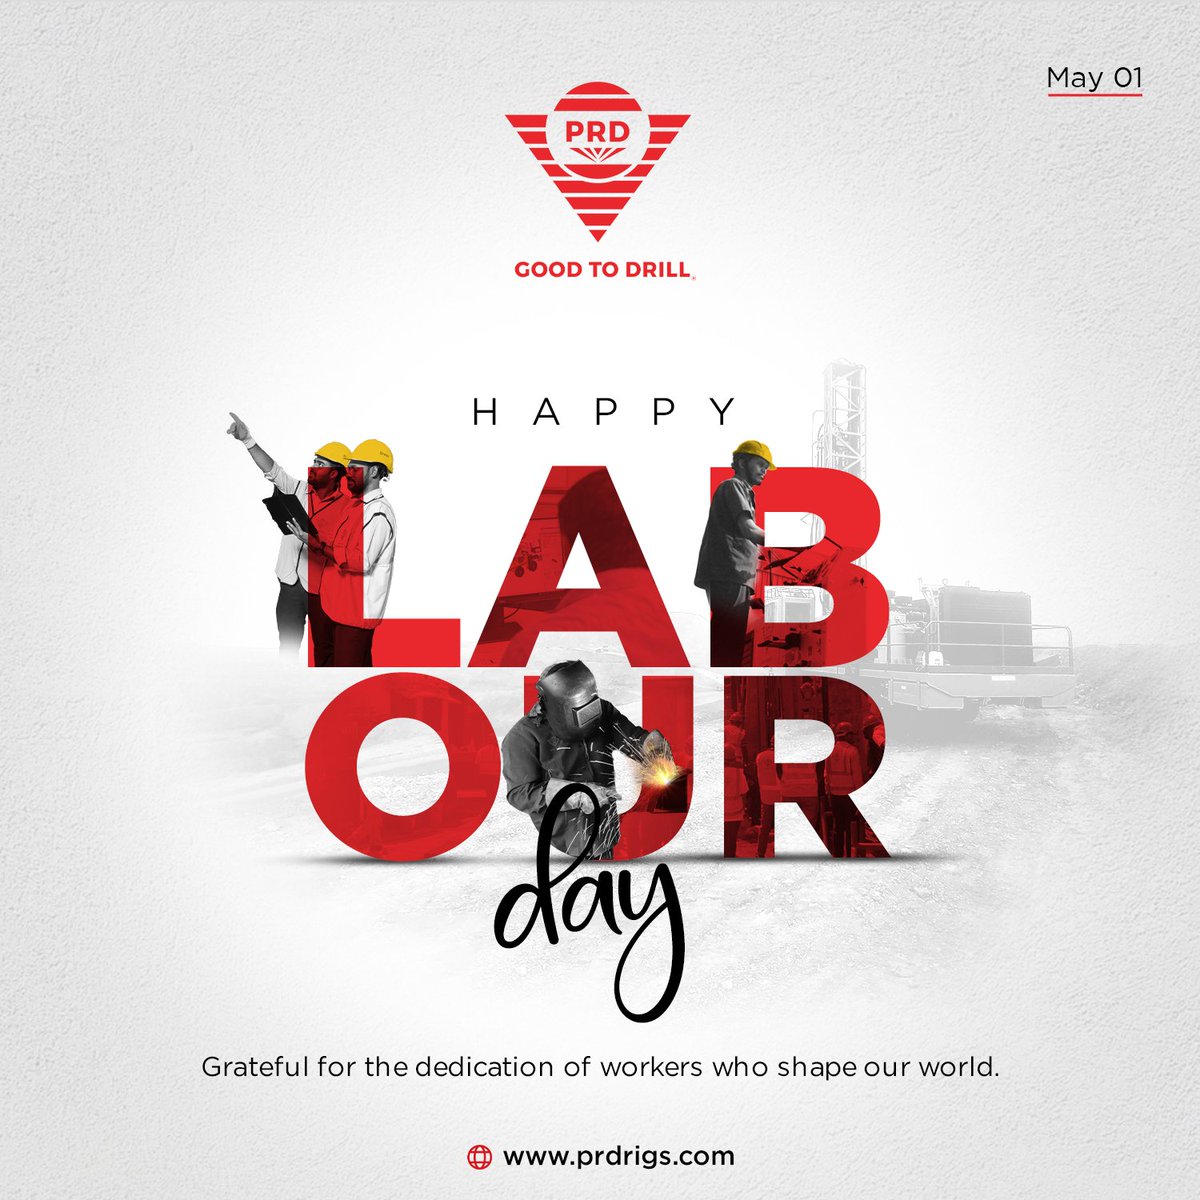 Taking a moment to appreciate the amazing contributions of our employees. Happy Labour Day!
.
.
.
.
.
.
.
.
.
.
#LabourDay #OurPeopleMakeTheDifference #ThankyouTeam #OurWorkforce #prdfam #Team #WorkersDay #Gratitude #labourday #mayday #mayone #PRD #May1 #prddrills #prdrigs #prd